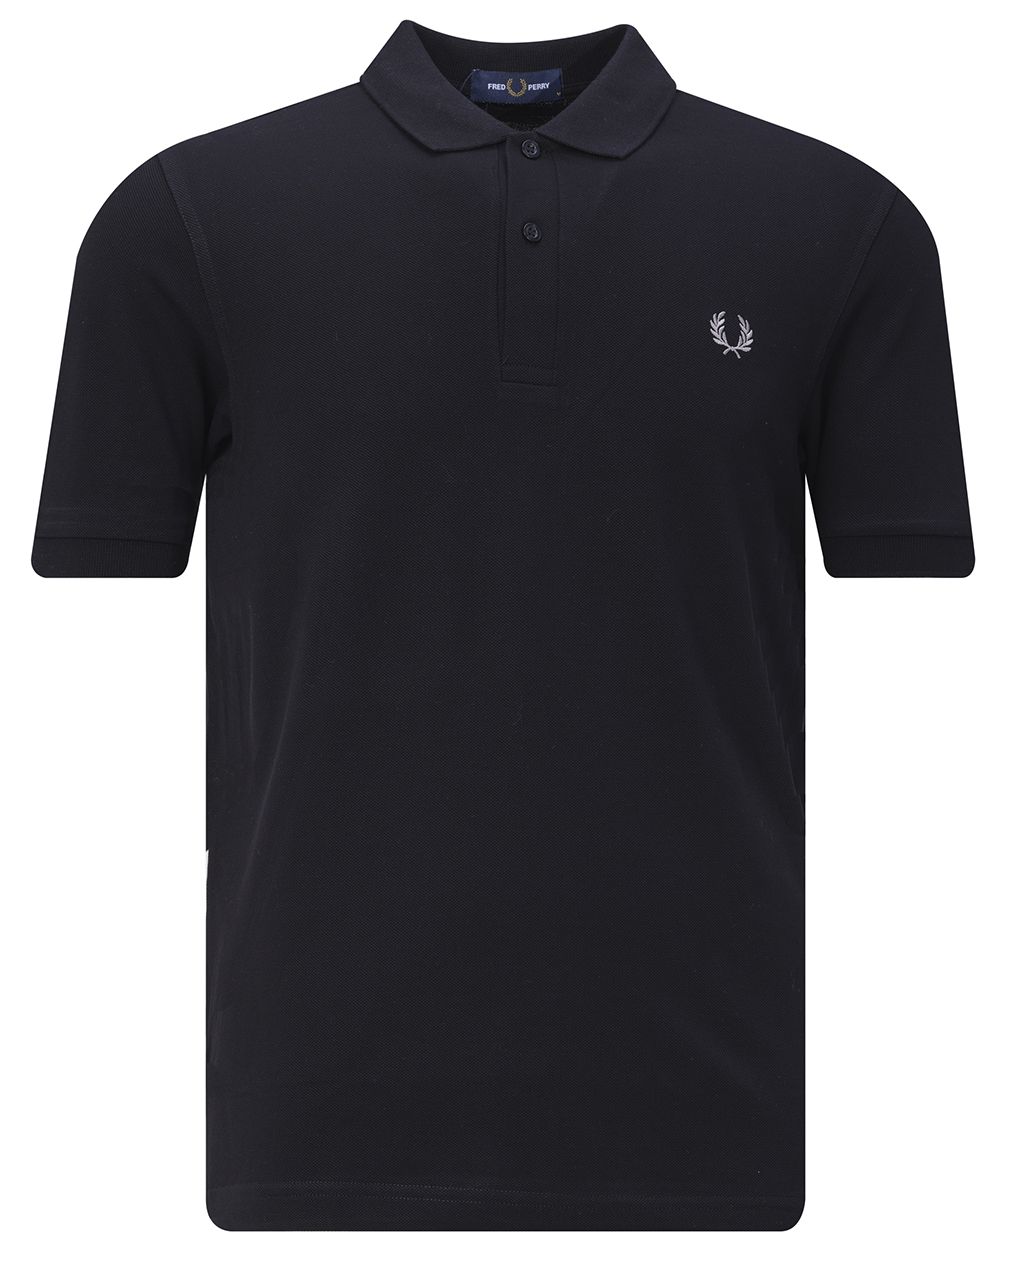 Fred Perry Polo KM Zwart 078889-001-L